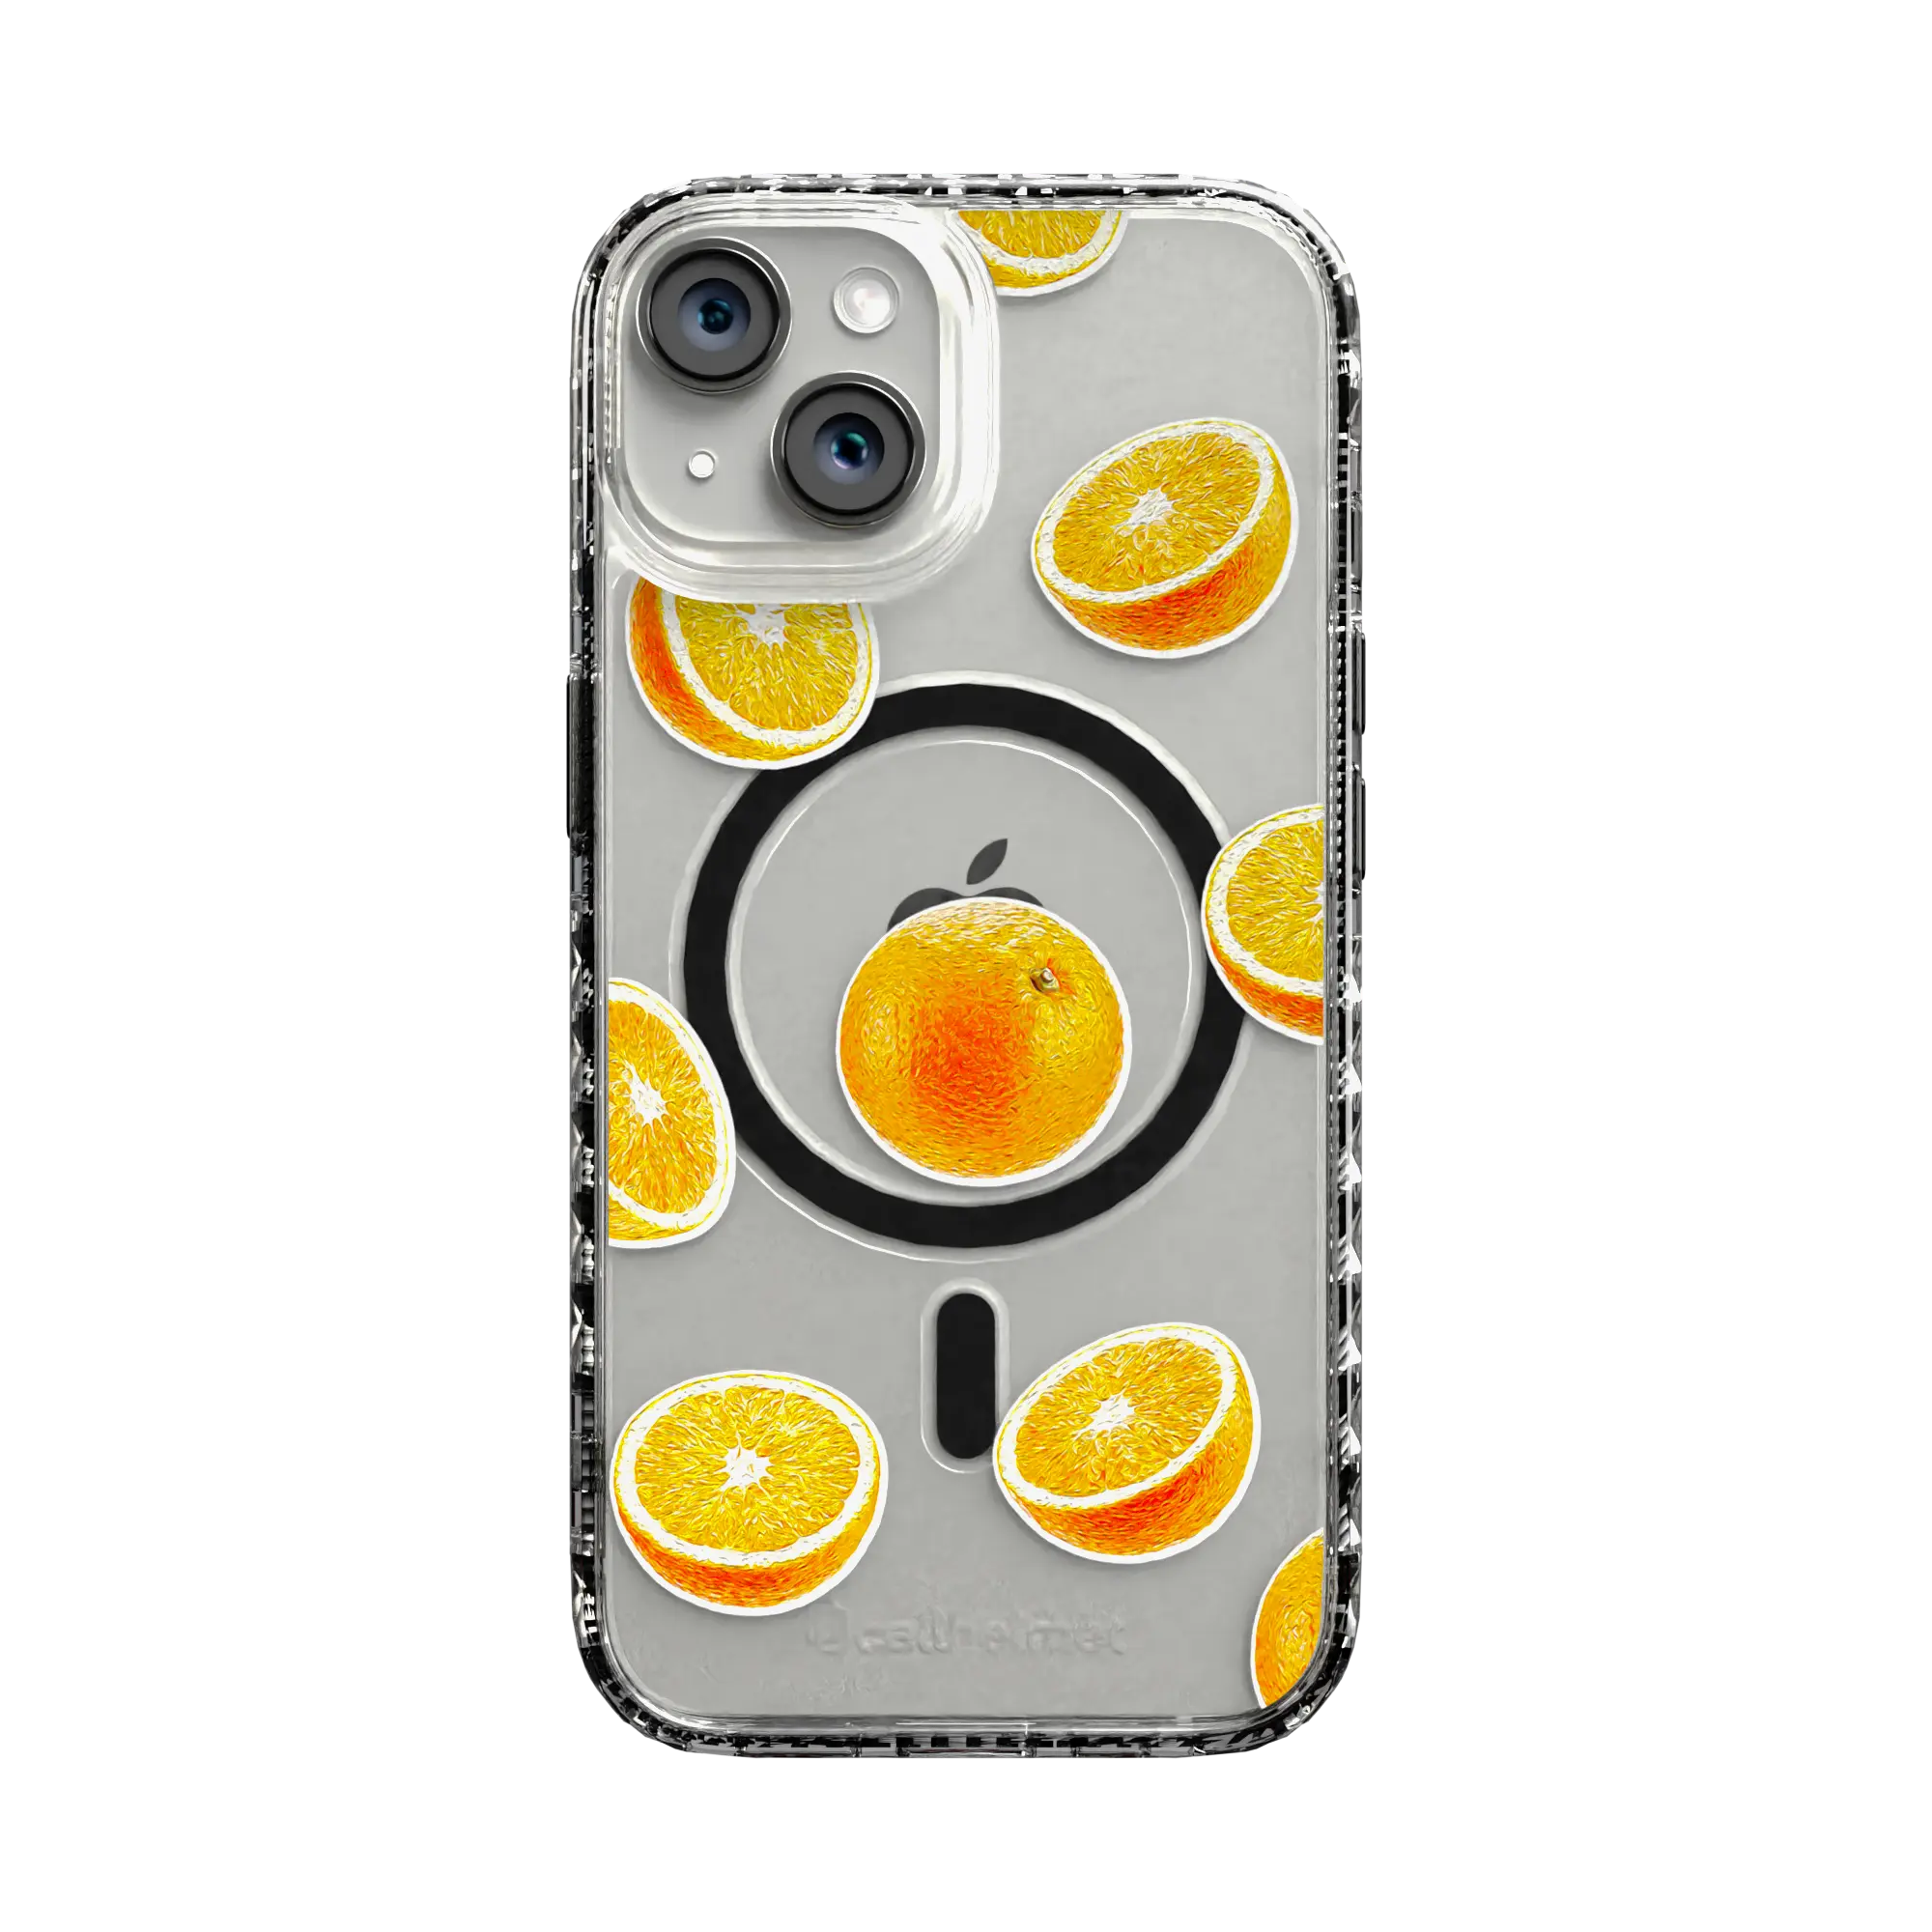 Apple-iPhone-14-Crystal-Clear Orange Zest | Protective MagSafe Case | Fruits Collection for Apple iPhone 14 Series cellhelmet cellhelmet